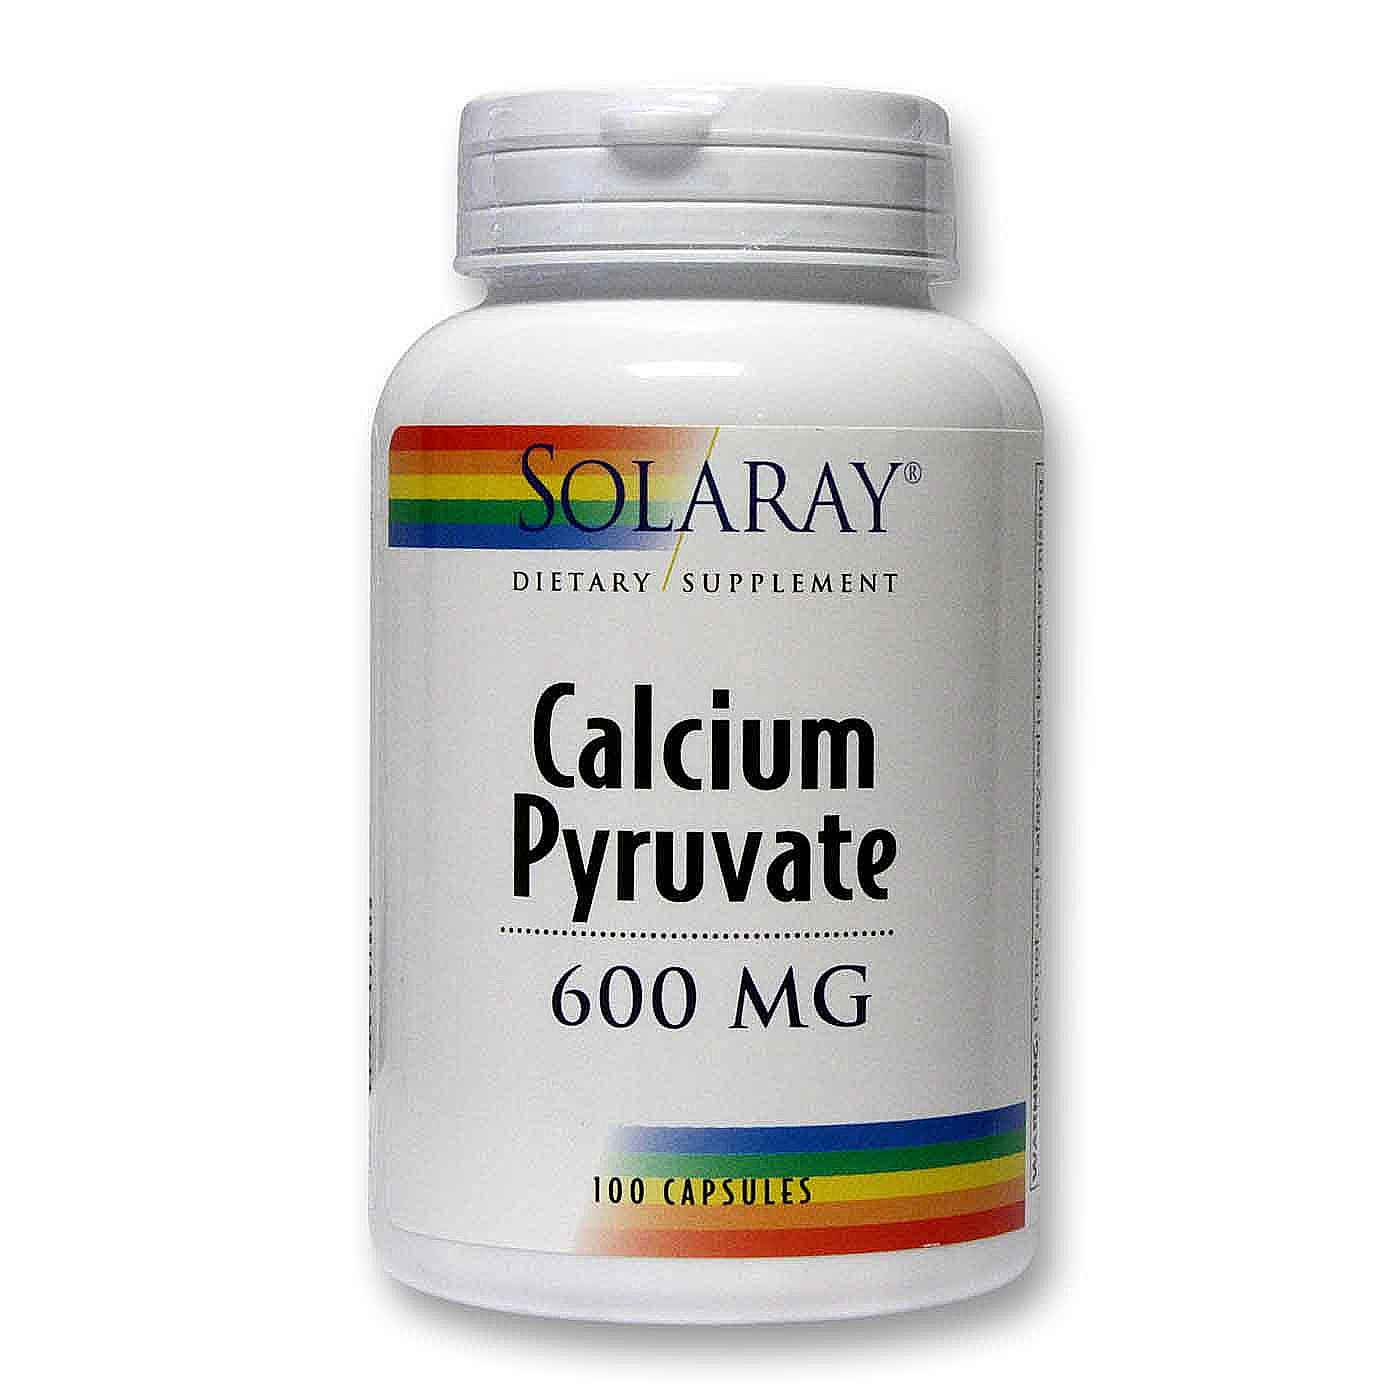 What is calcium pyruvate?